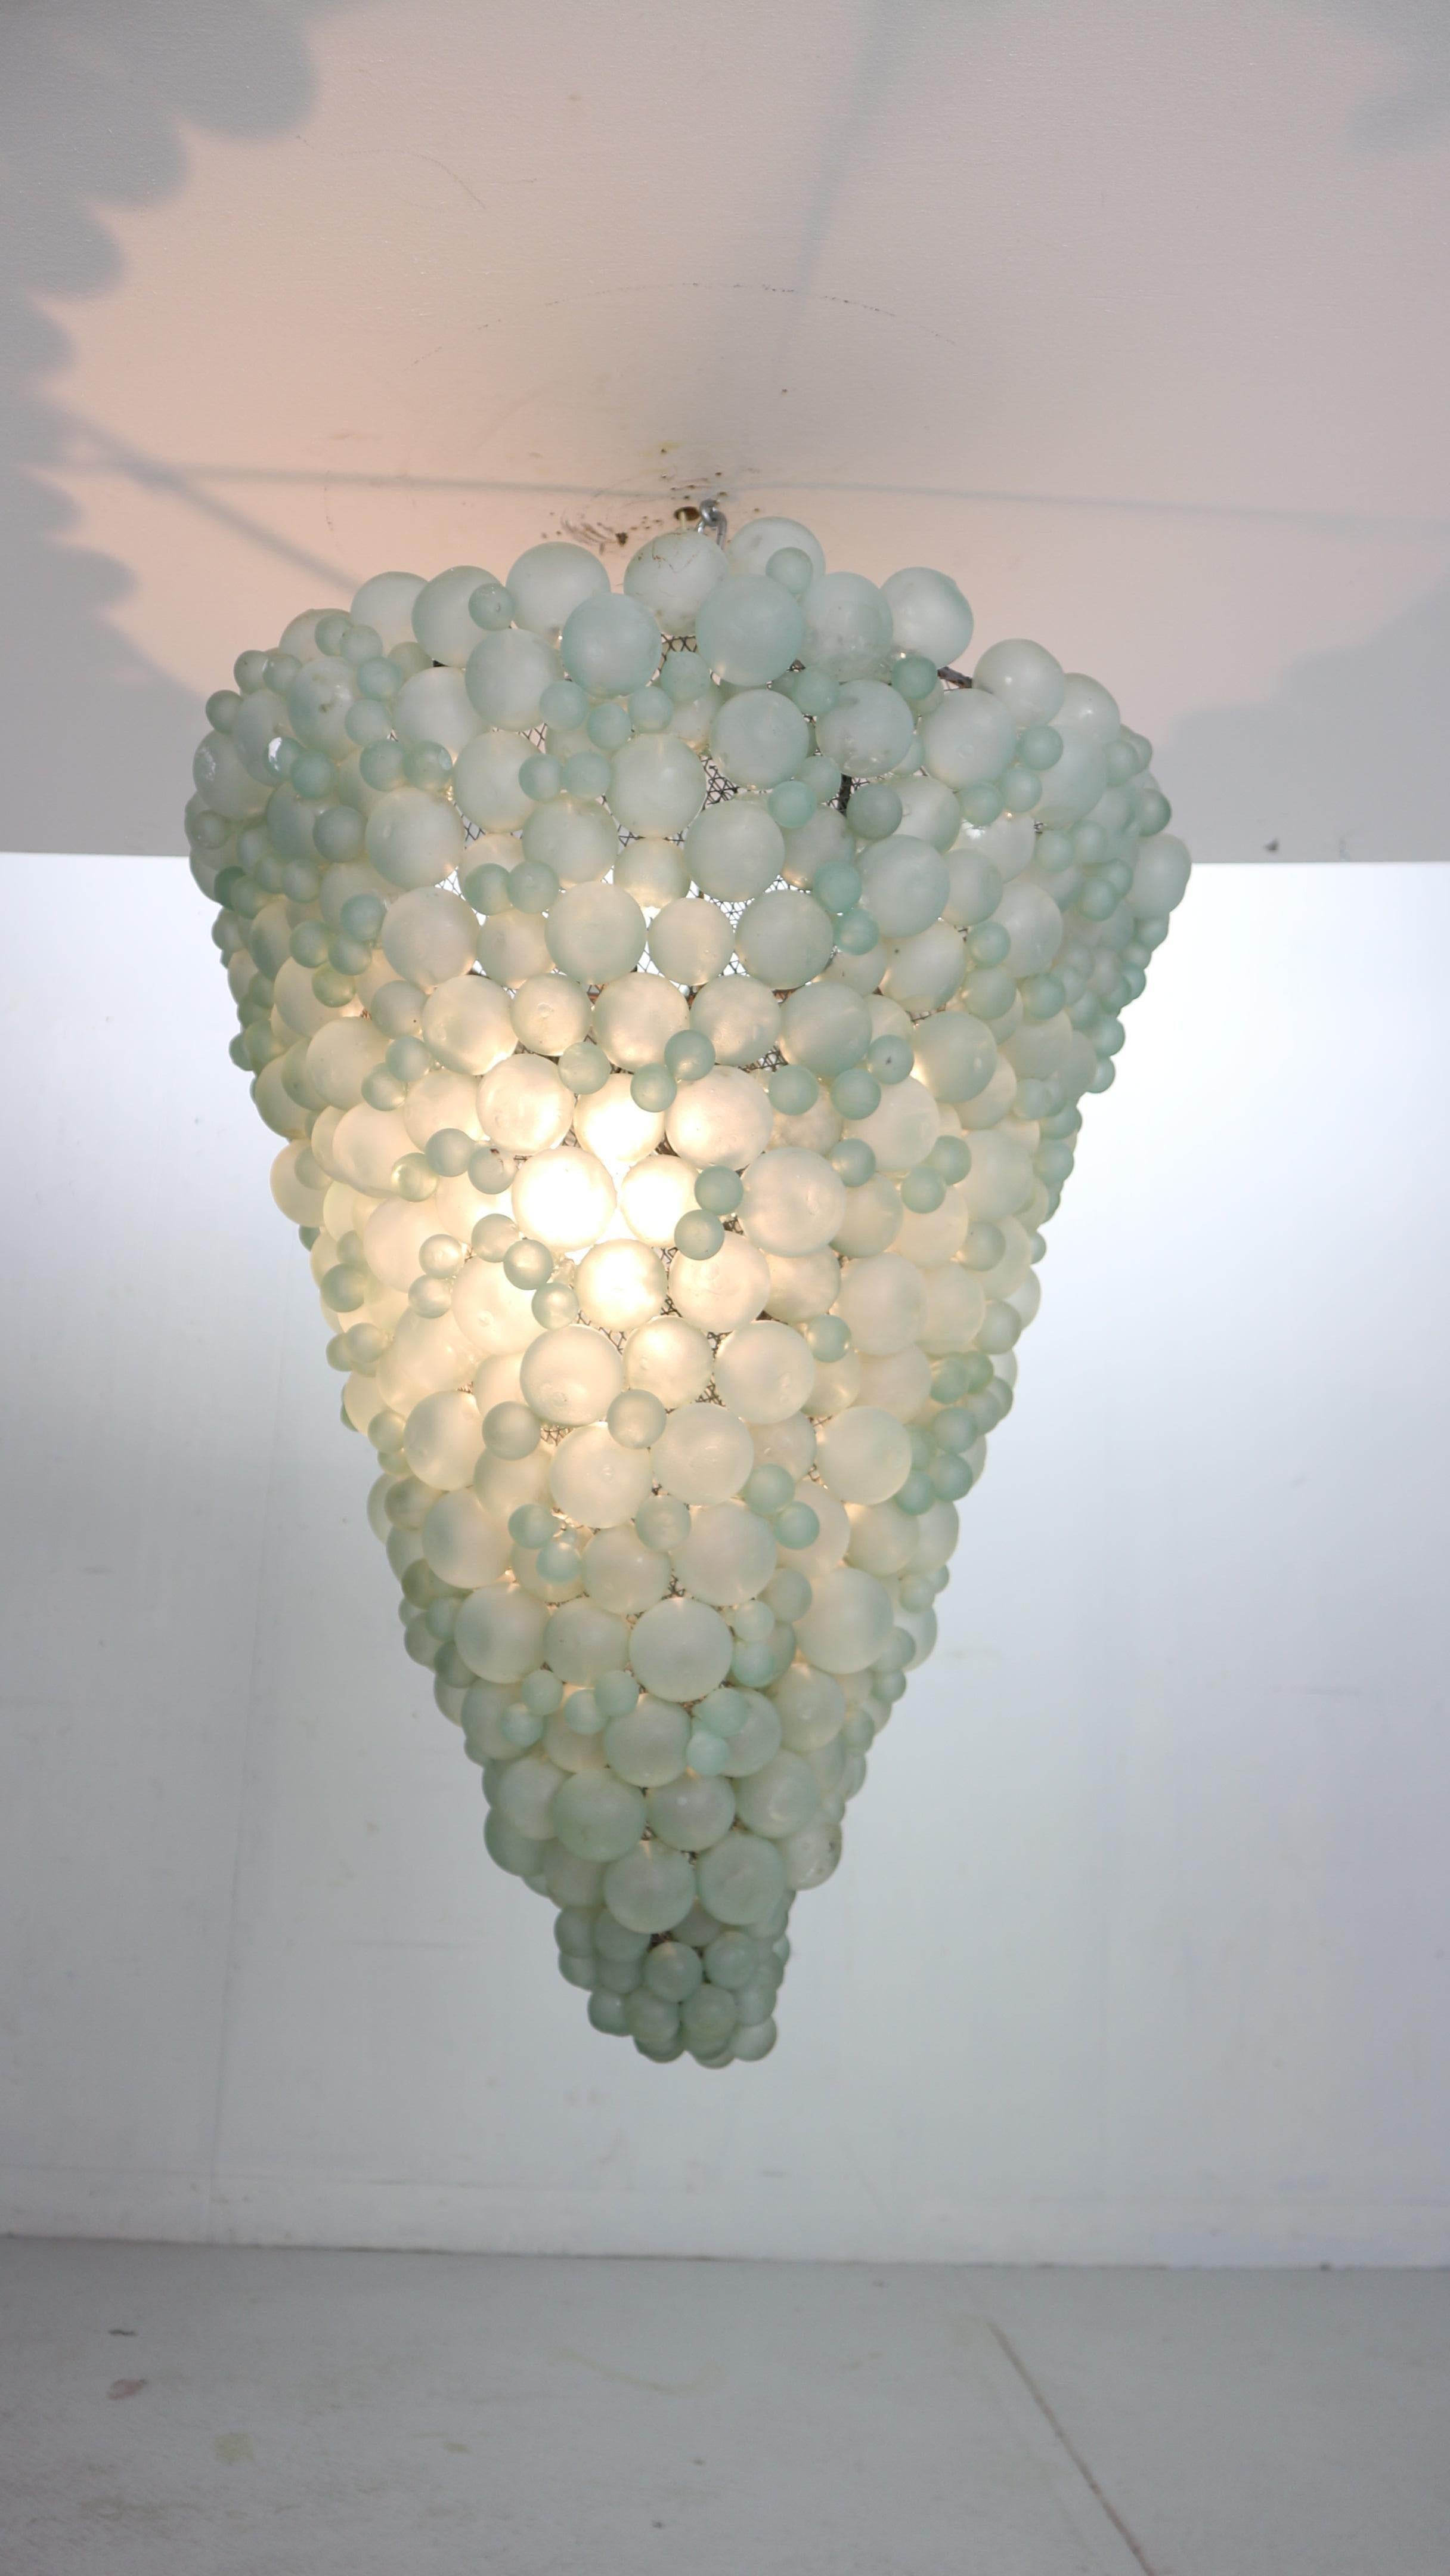 Stunning Mid-Century Modern period large chandelier made of Murano glass in 1930's period, Italy.

Each delicate grape is hand-blown in Damascus by traditional craftsmen and mounted on a metal frame to create dozens of unique, individually created